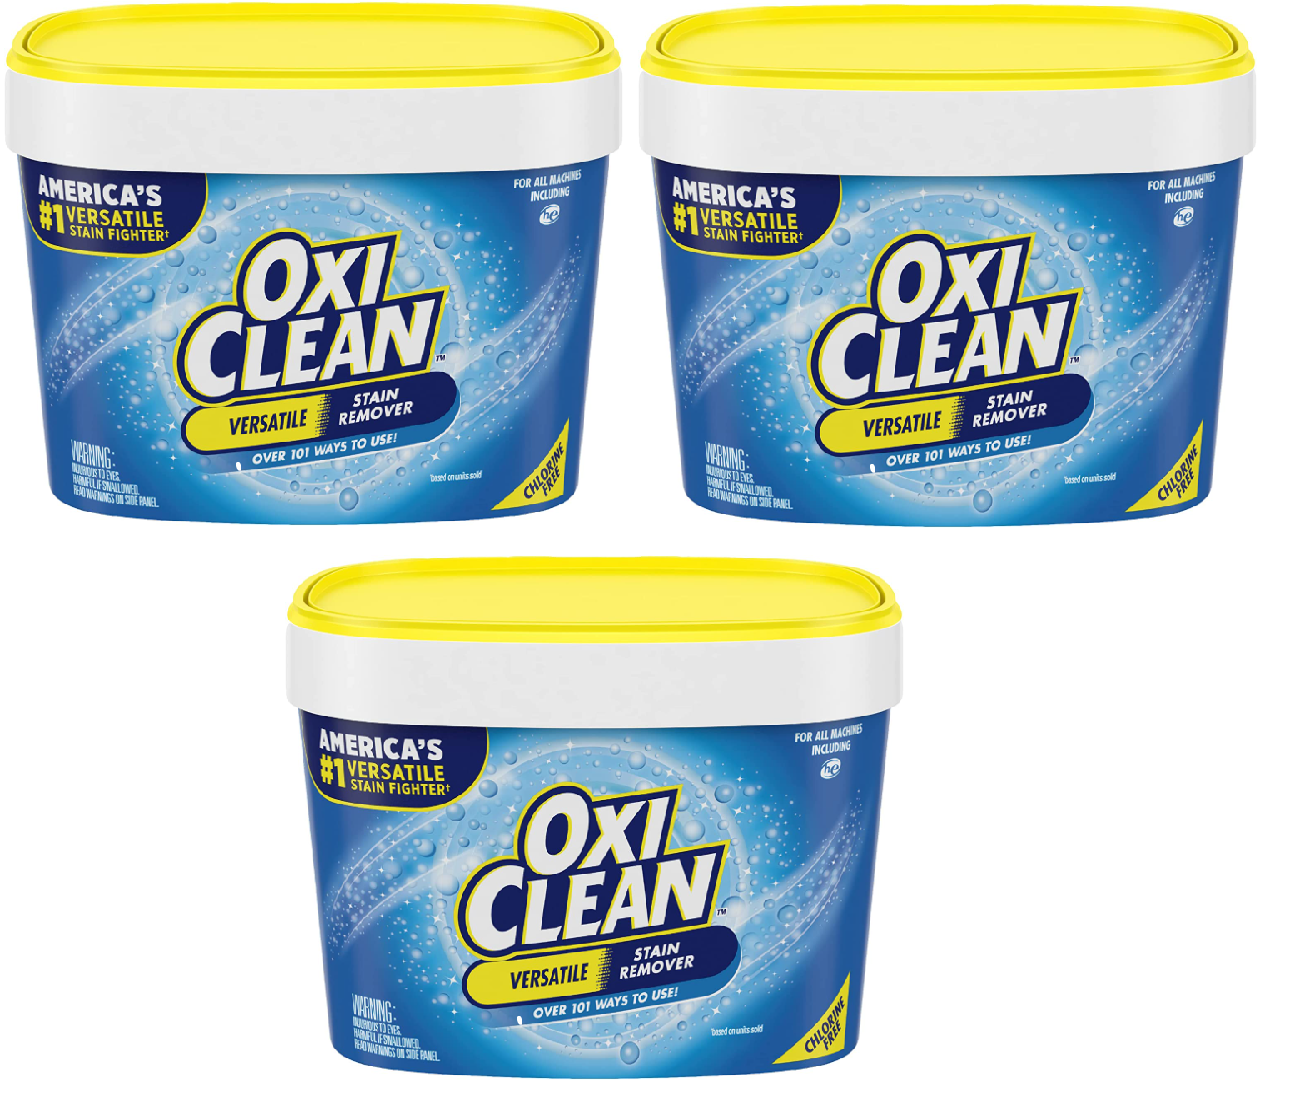 3-Lb OxiClean Versatile Stain Remover Powder $15.62 ($5.20 each) w/ S&S + Free Shipping